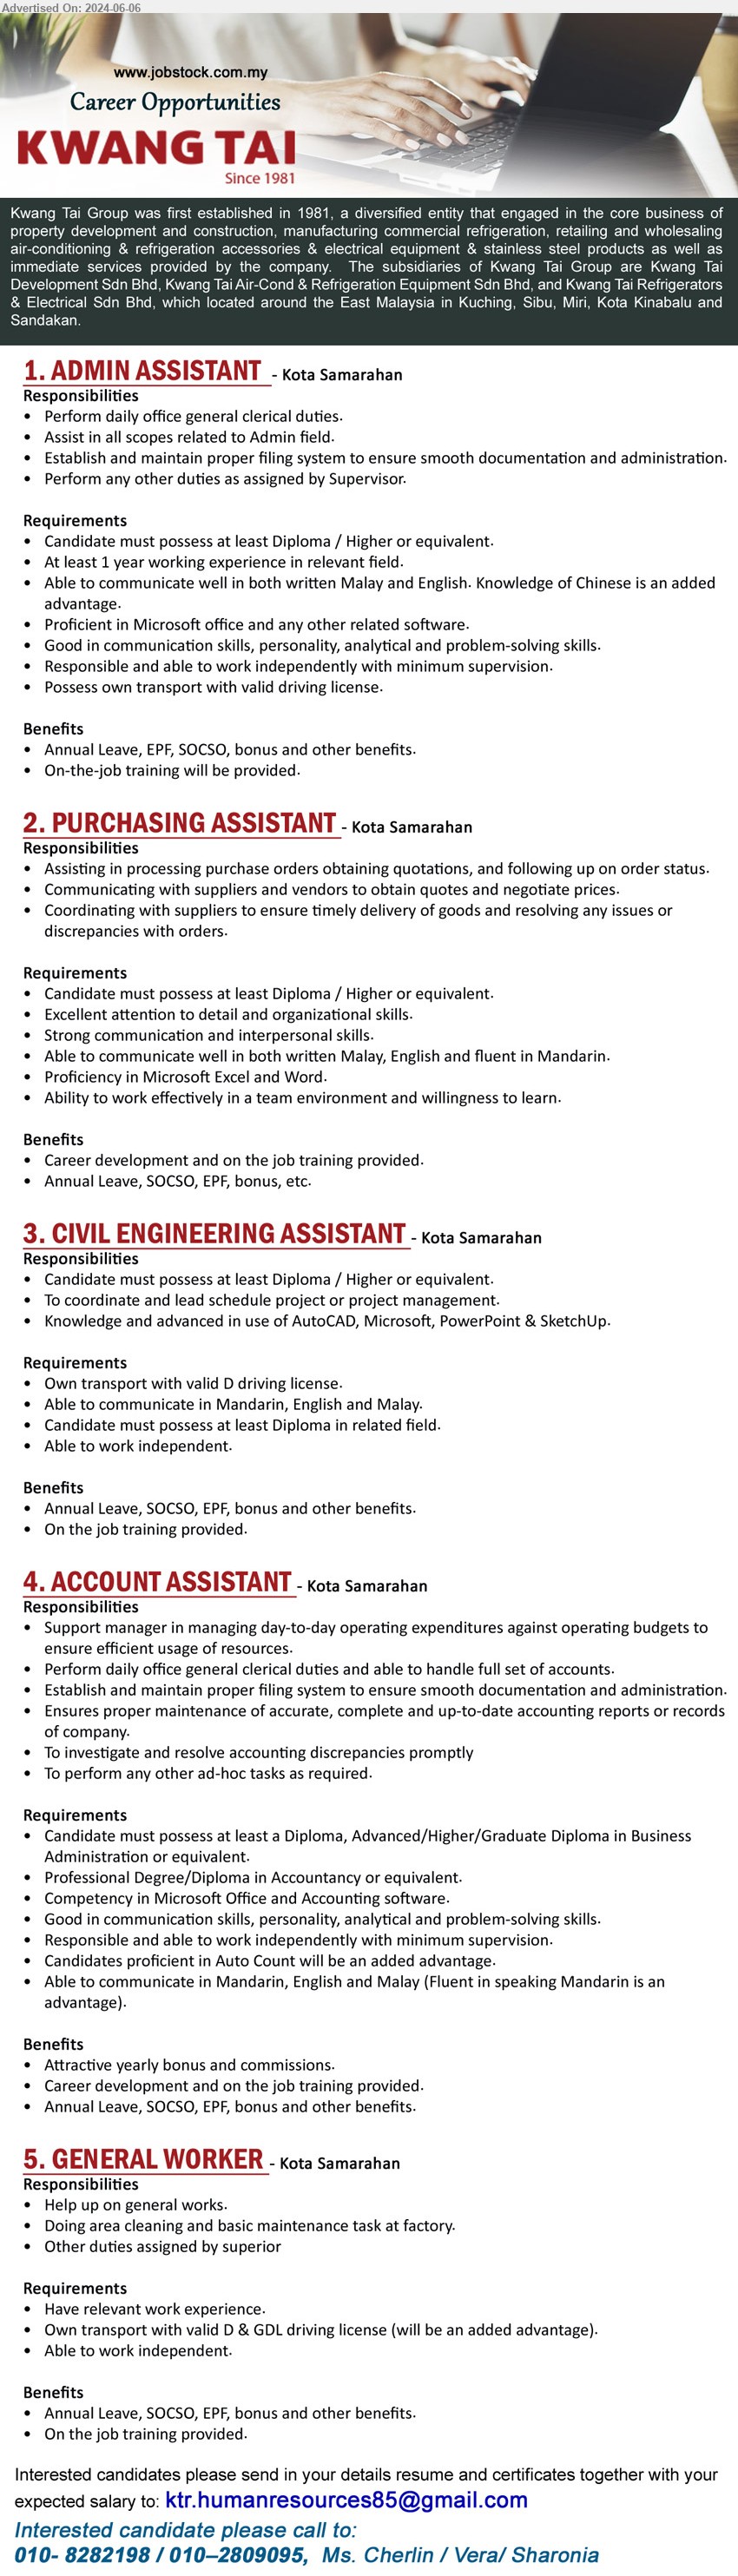 KWANG TAI GROUP - 1. ADMIN ASSISTANT (Kota Samarahan), Diploma or higher, Proficient in Microsoft office and any other related software.,...
2. PURCHASING ASSISTANT (Kota Samarahan), Diploma or higher, Proficiency in Microsoft Excel and Word,...
3. CIVIL ENGINEERING ASSISTANT (Kota Samarahan), Diploma or higher, Knowledge and advanced in use of AutoCAD, Microsoft, PowerPoint & SketchUp,...
4. ACCOUNT ASSISTANT (Kota Samarahan), Diploma, Advanced/Higher/Graduate Diploma in Business Administration,...
5. GENERAL WORKER (Kota Samarahan), Own transport with valid D & GDL driving license (will be an added advantage).,...
Contact: 010-8282198, 010–2809095 / Email resume to ...